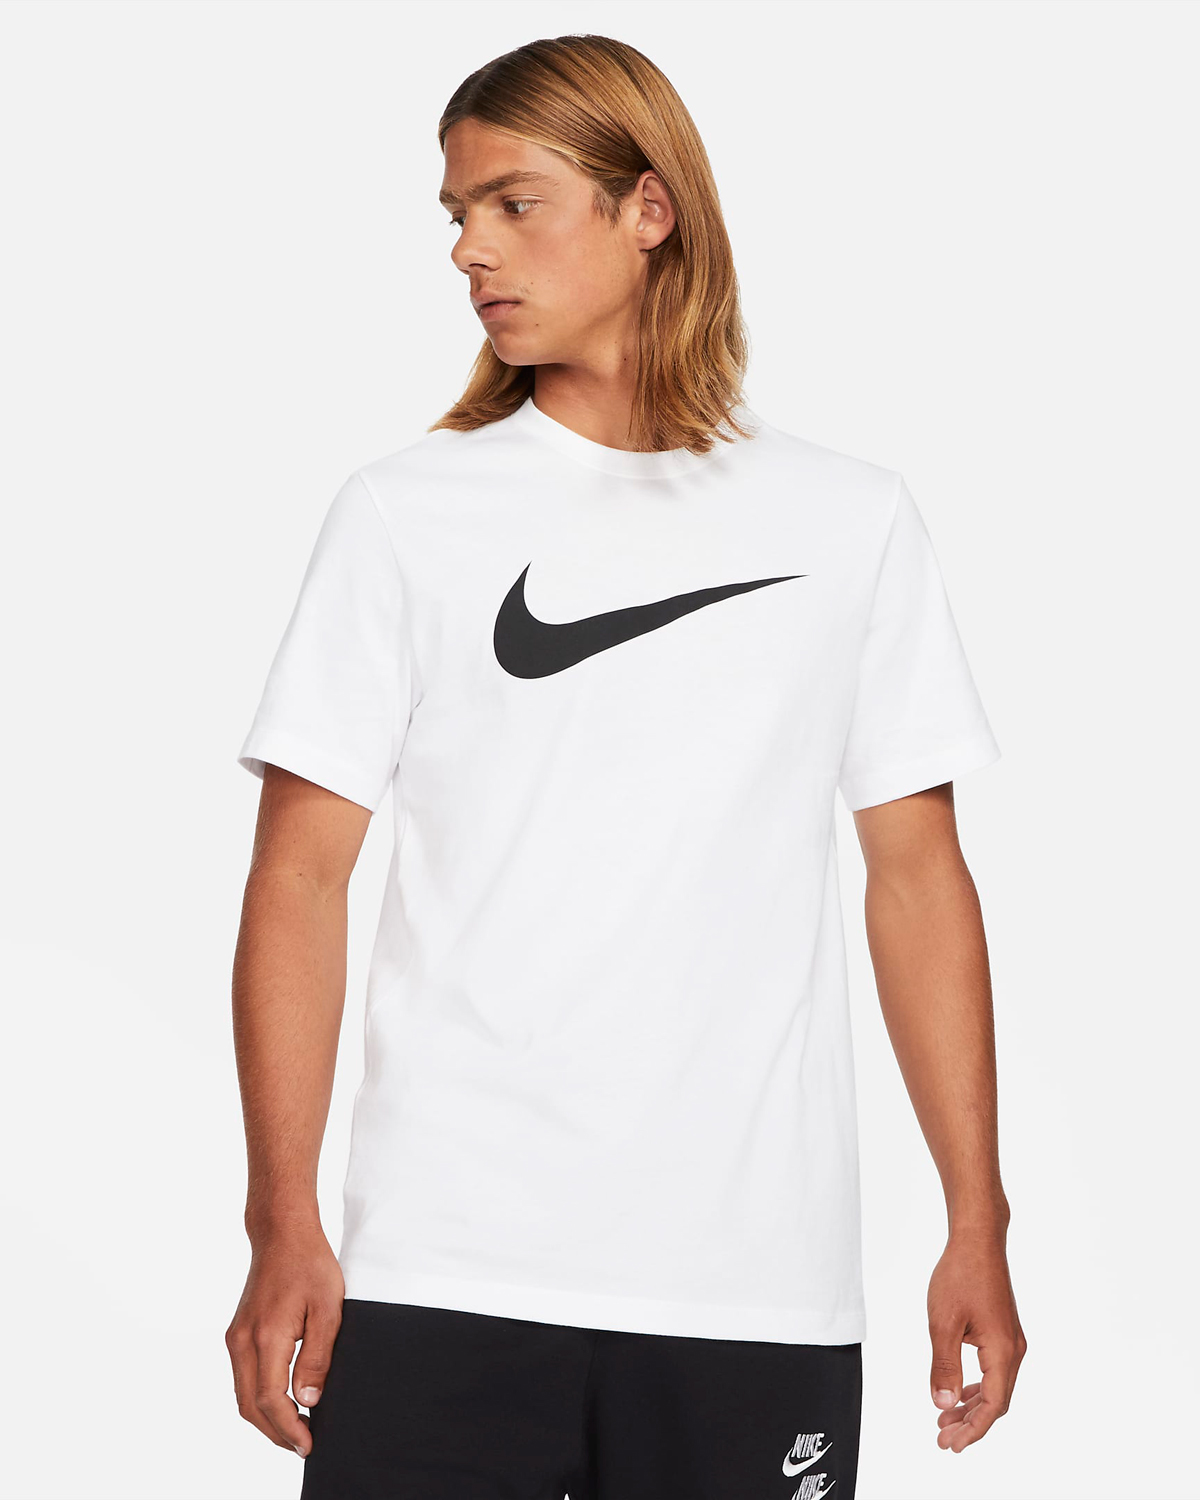 Nike Dunk Low White Black Stormtrooper Shirts Hats Outfits